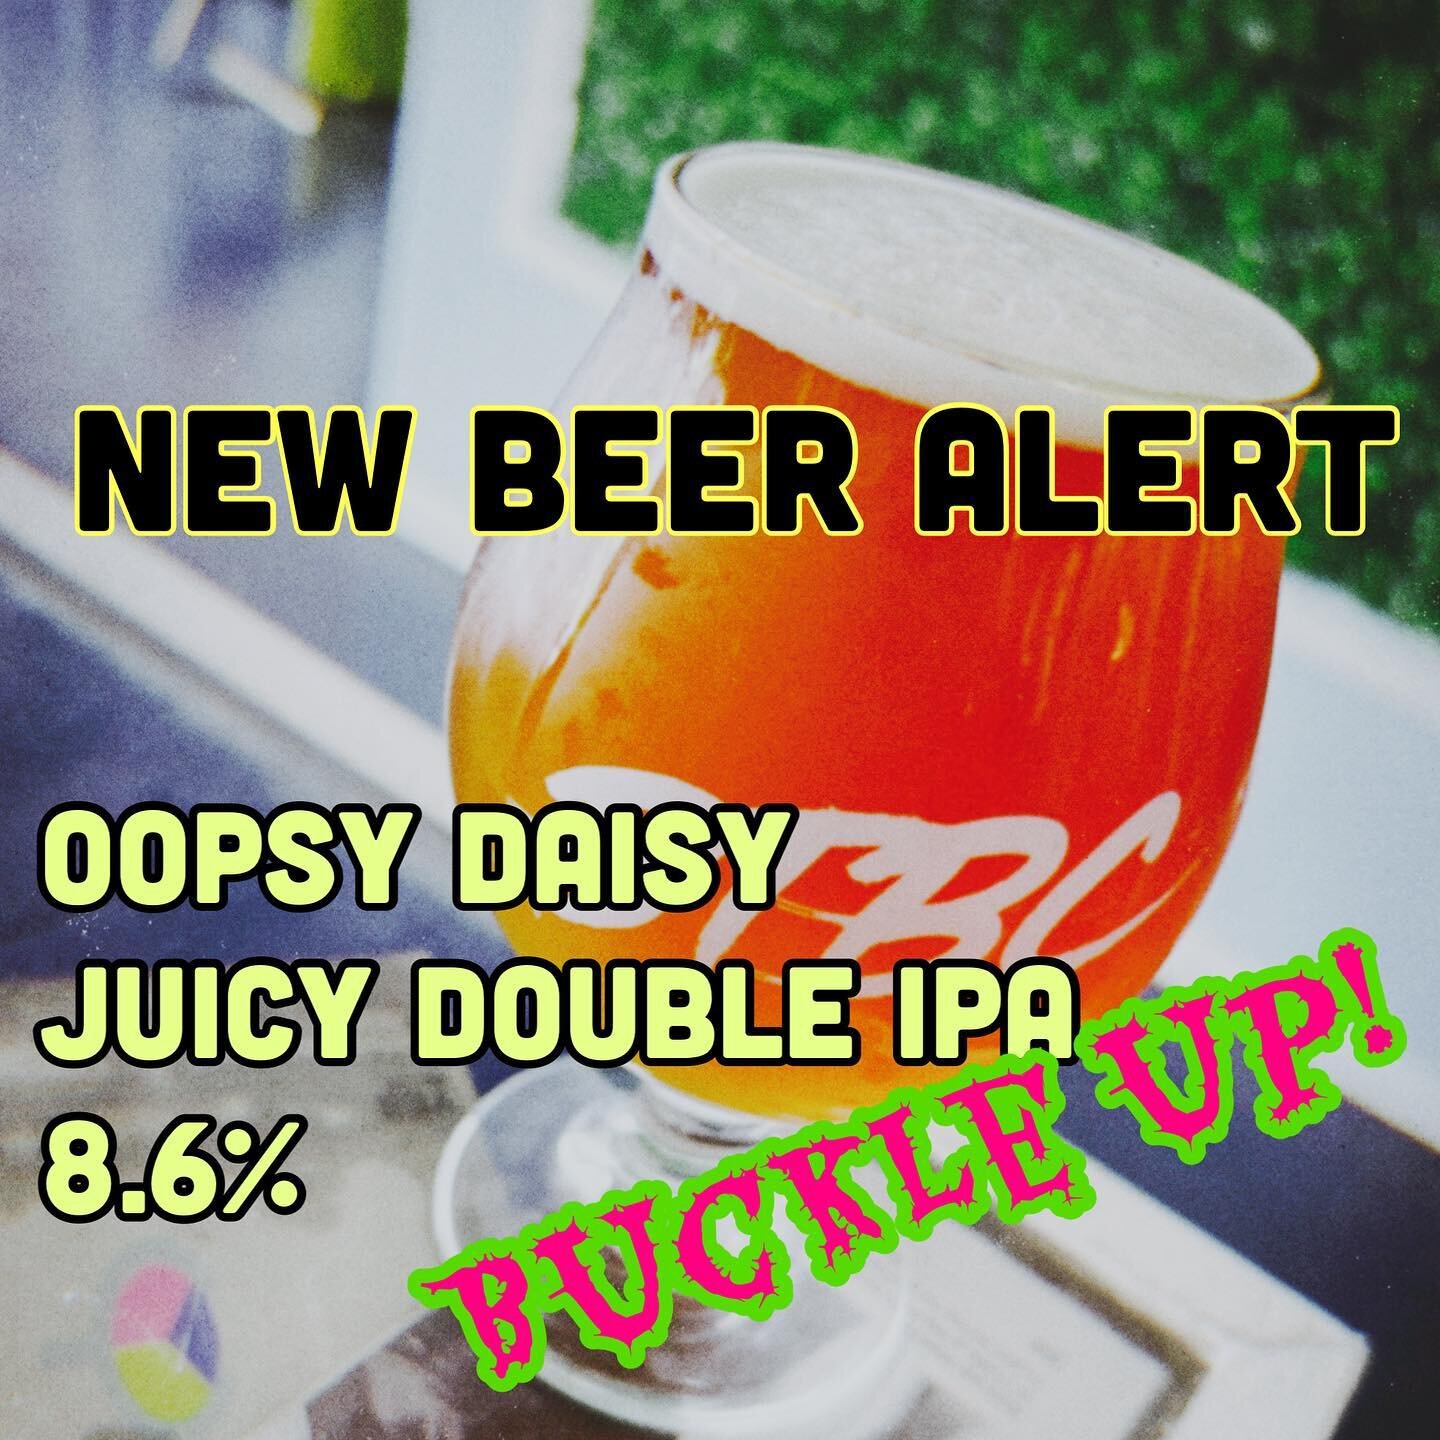 IT&rsquo;S GIVING JUICY. 
NO CAP THIS A REAL ONE. ONG. 
Our first double IPA. The story behind this beer is like the Old Dirty Blonde&mdash;a mistake that turned out to be a banger. Sometimes you&rsquo;ve got to roll with the punches. At 8.6%, this o